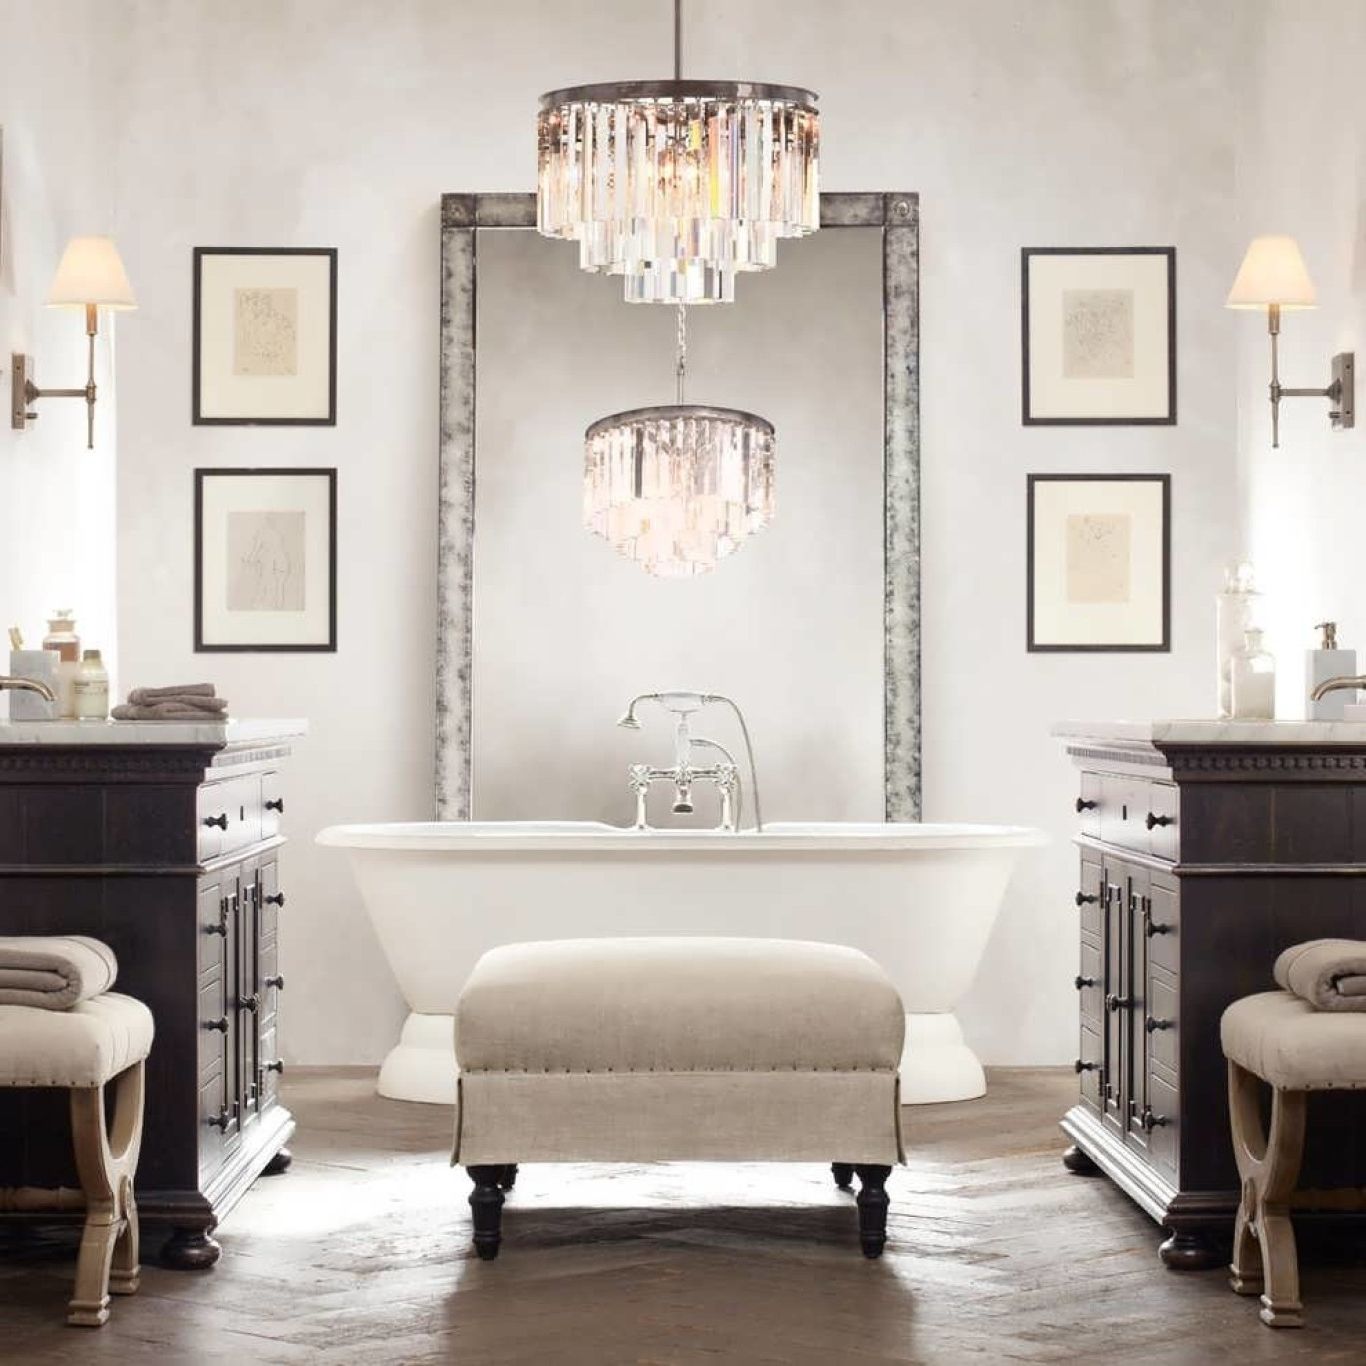 Modern Bathroom Lighting Pertaining To Well Known Bathroom Lighting With Matching Chandeliers (View 1 of 20)